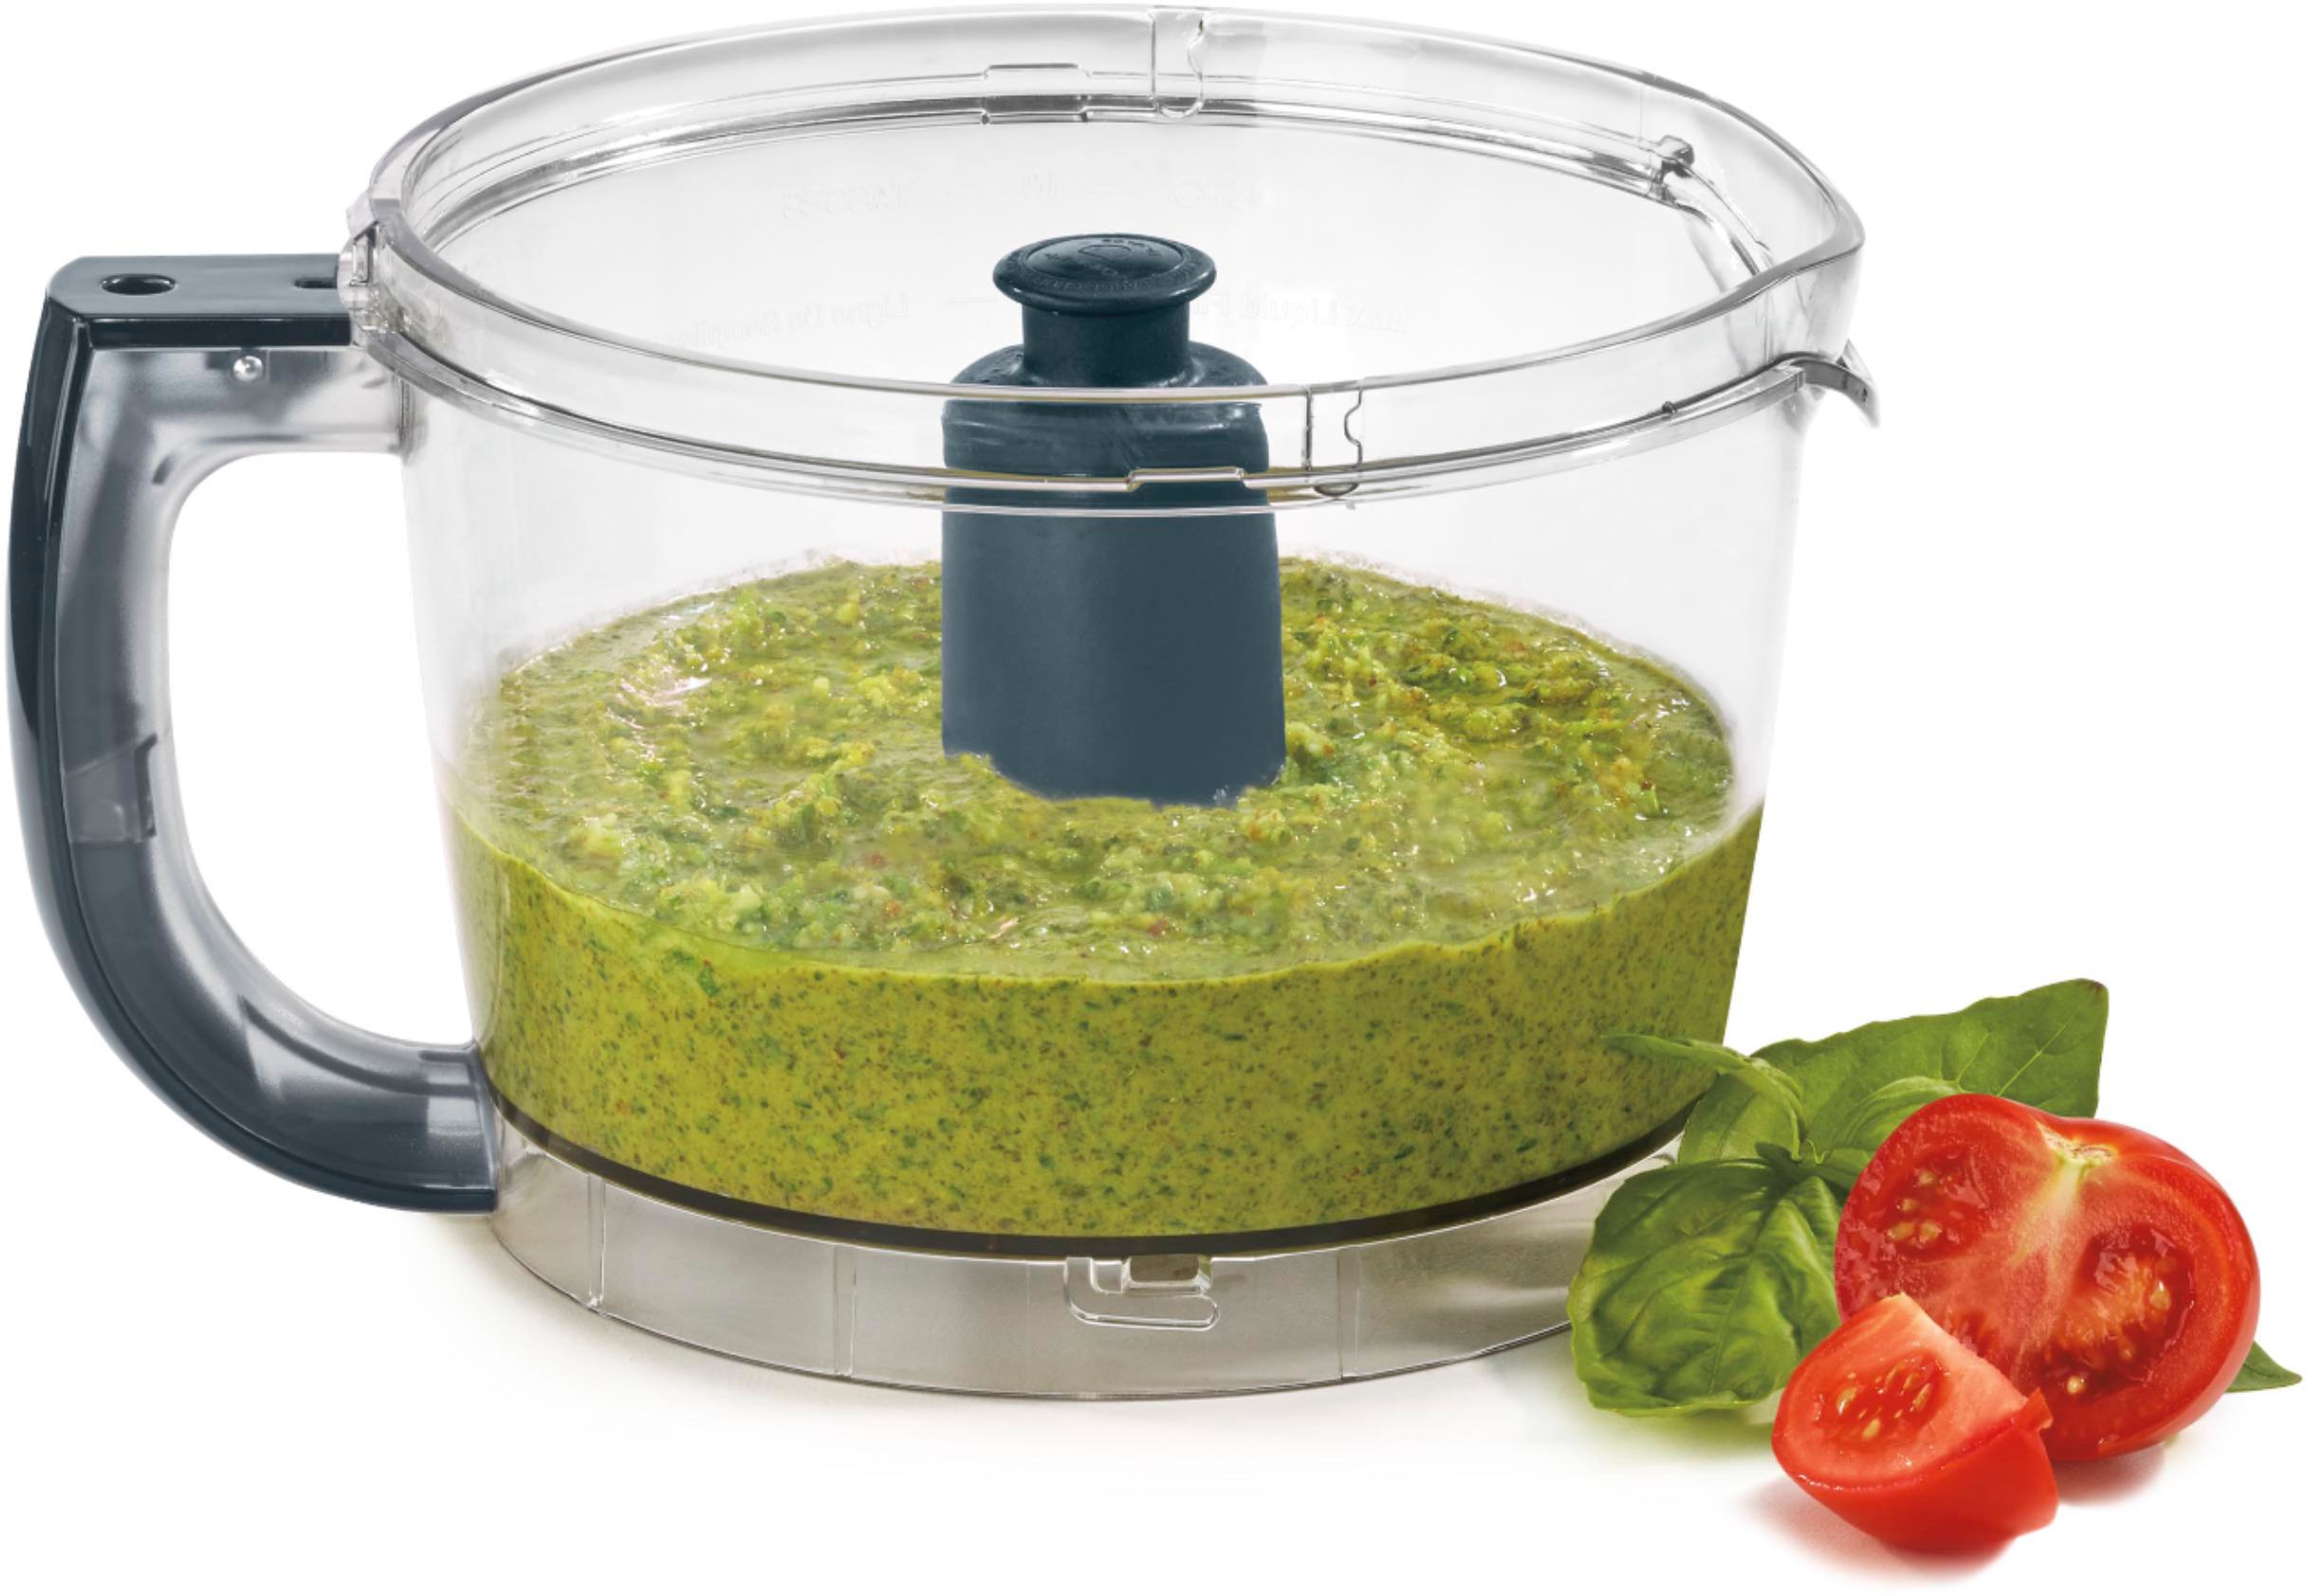 Elite Collection® 2.0 12 Cup Food Processor for sale or rent at